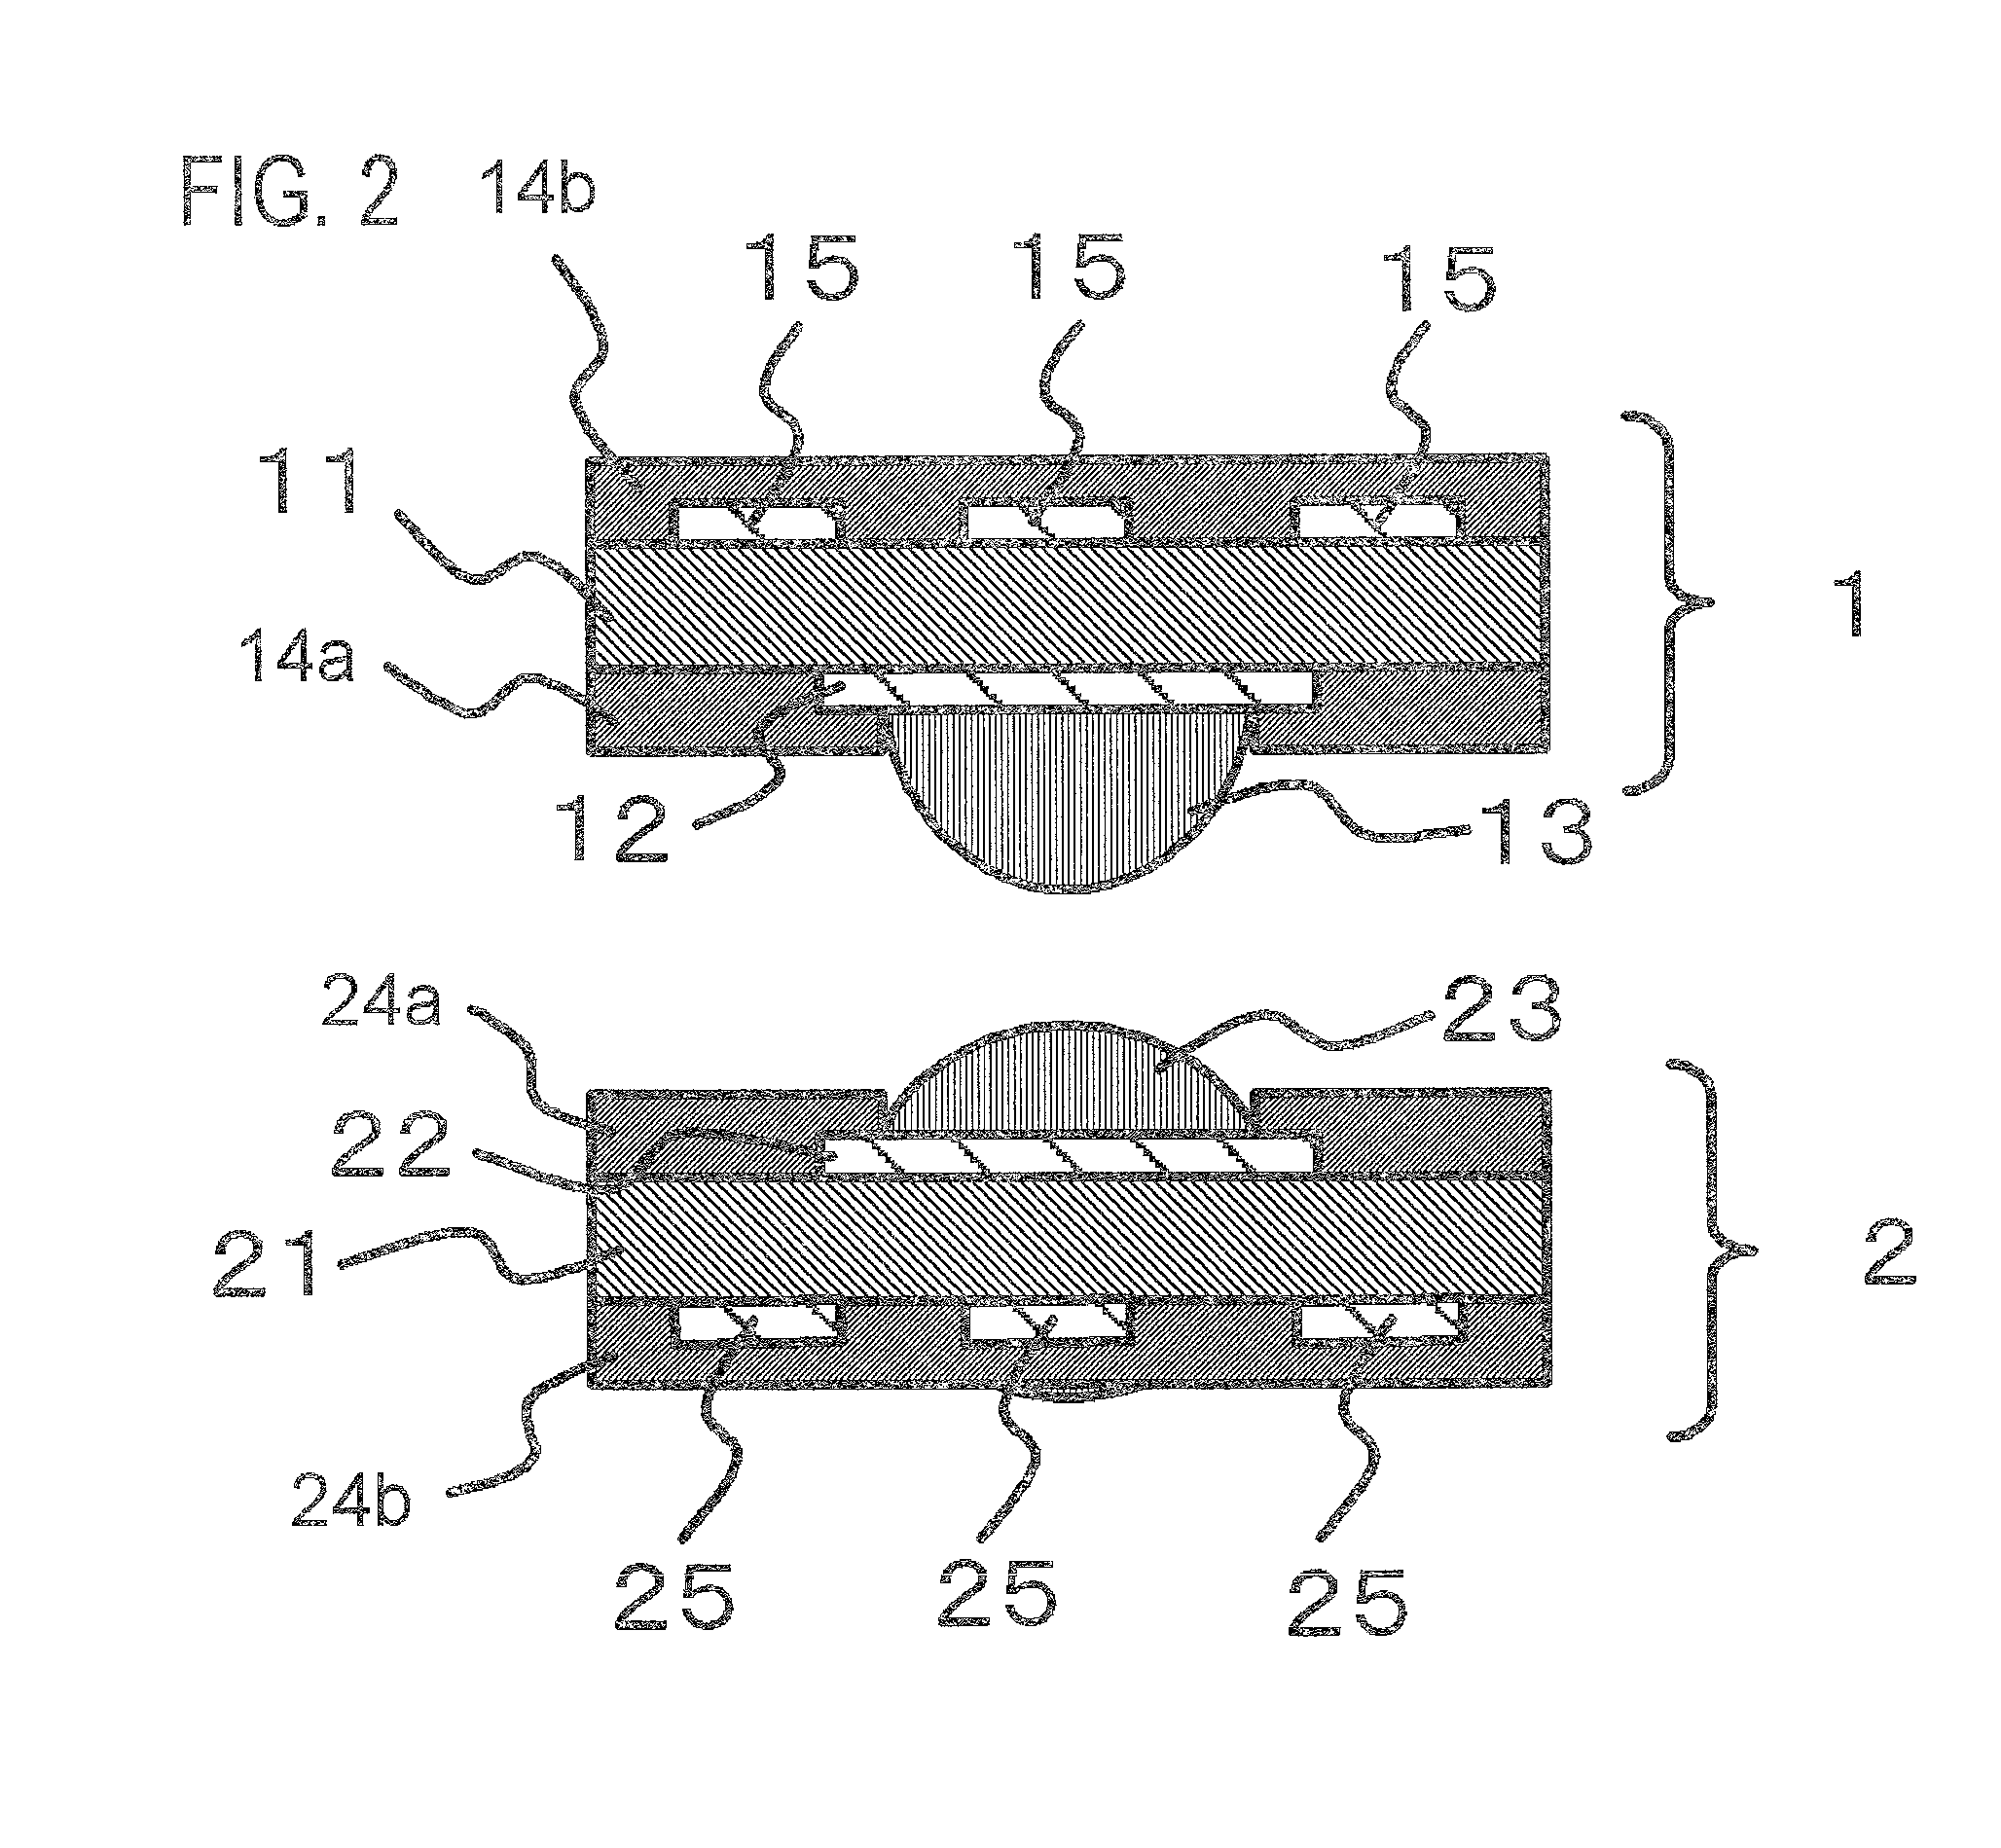 Electrical connection and method of manufacturing the same